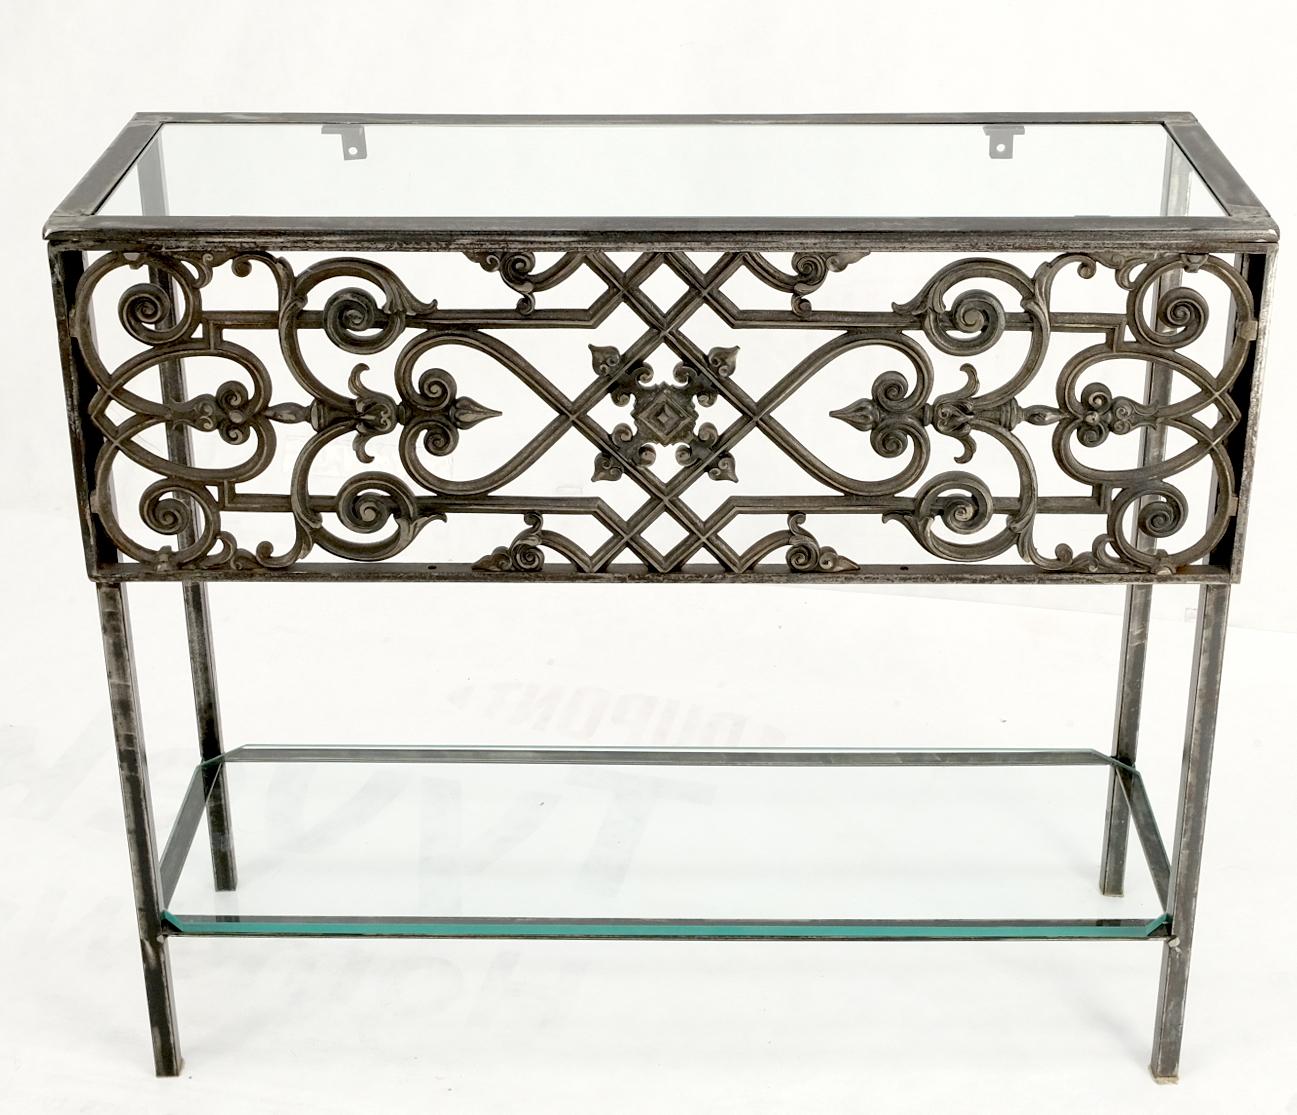 20th Century Polished Cast Iron Ornament 2 Tier Glass Top Lower Shelf Console Sofa Table For Sale